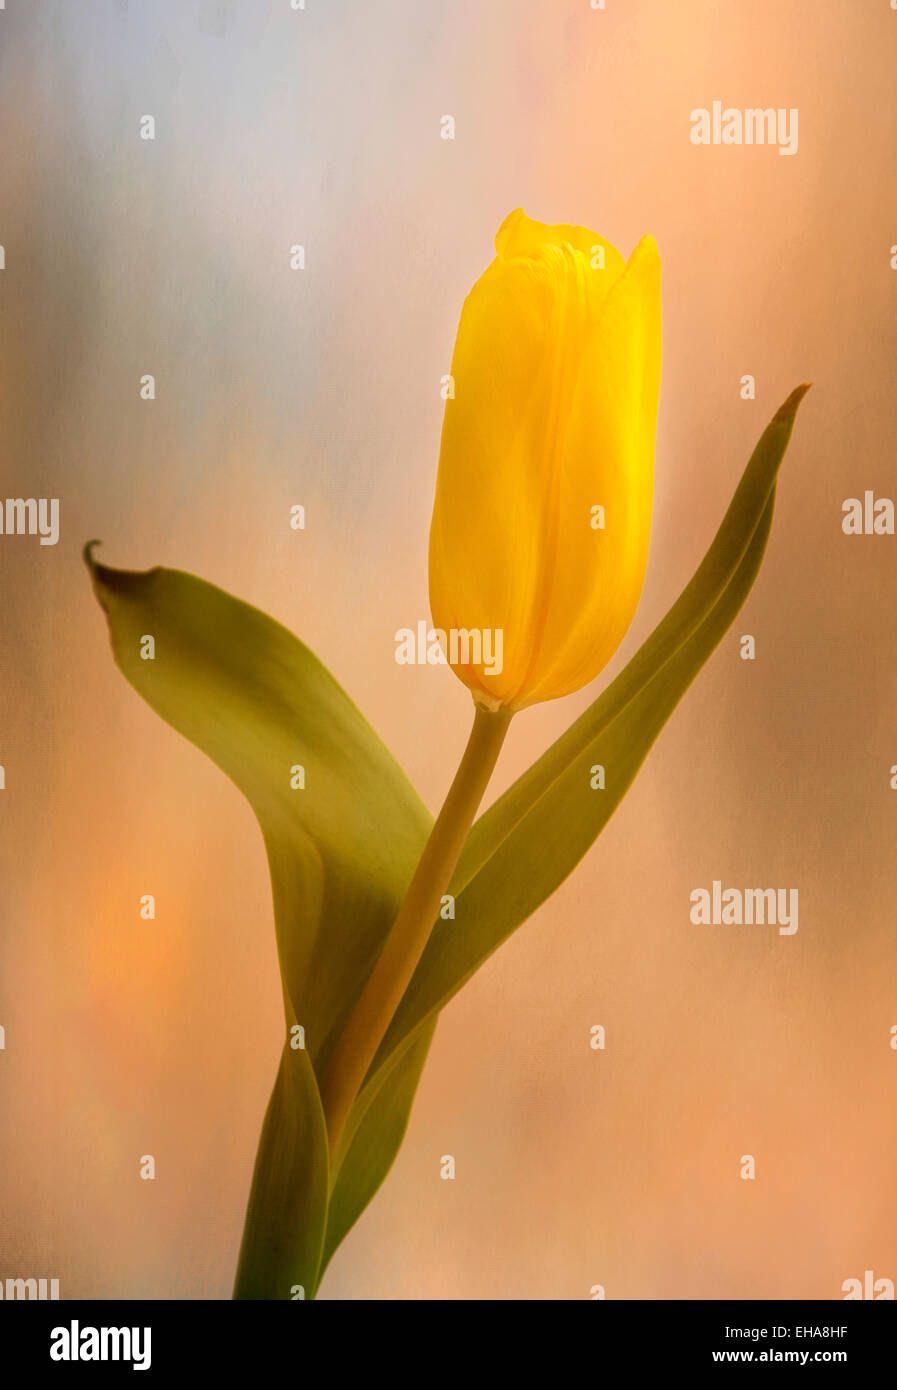 Tulip Golden Sunrise.  A beautiful yellow tulip rises gracefully against a soft, pastel background Stock Photo